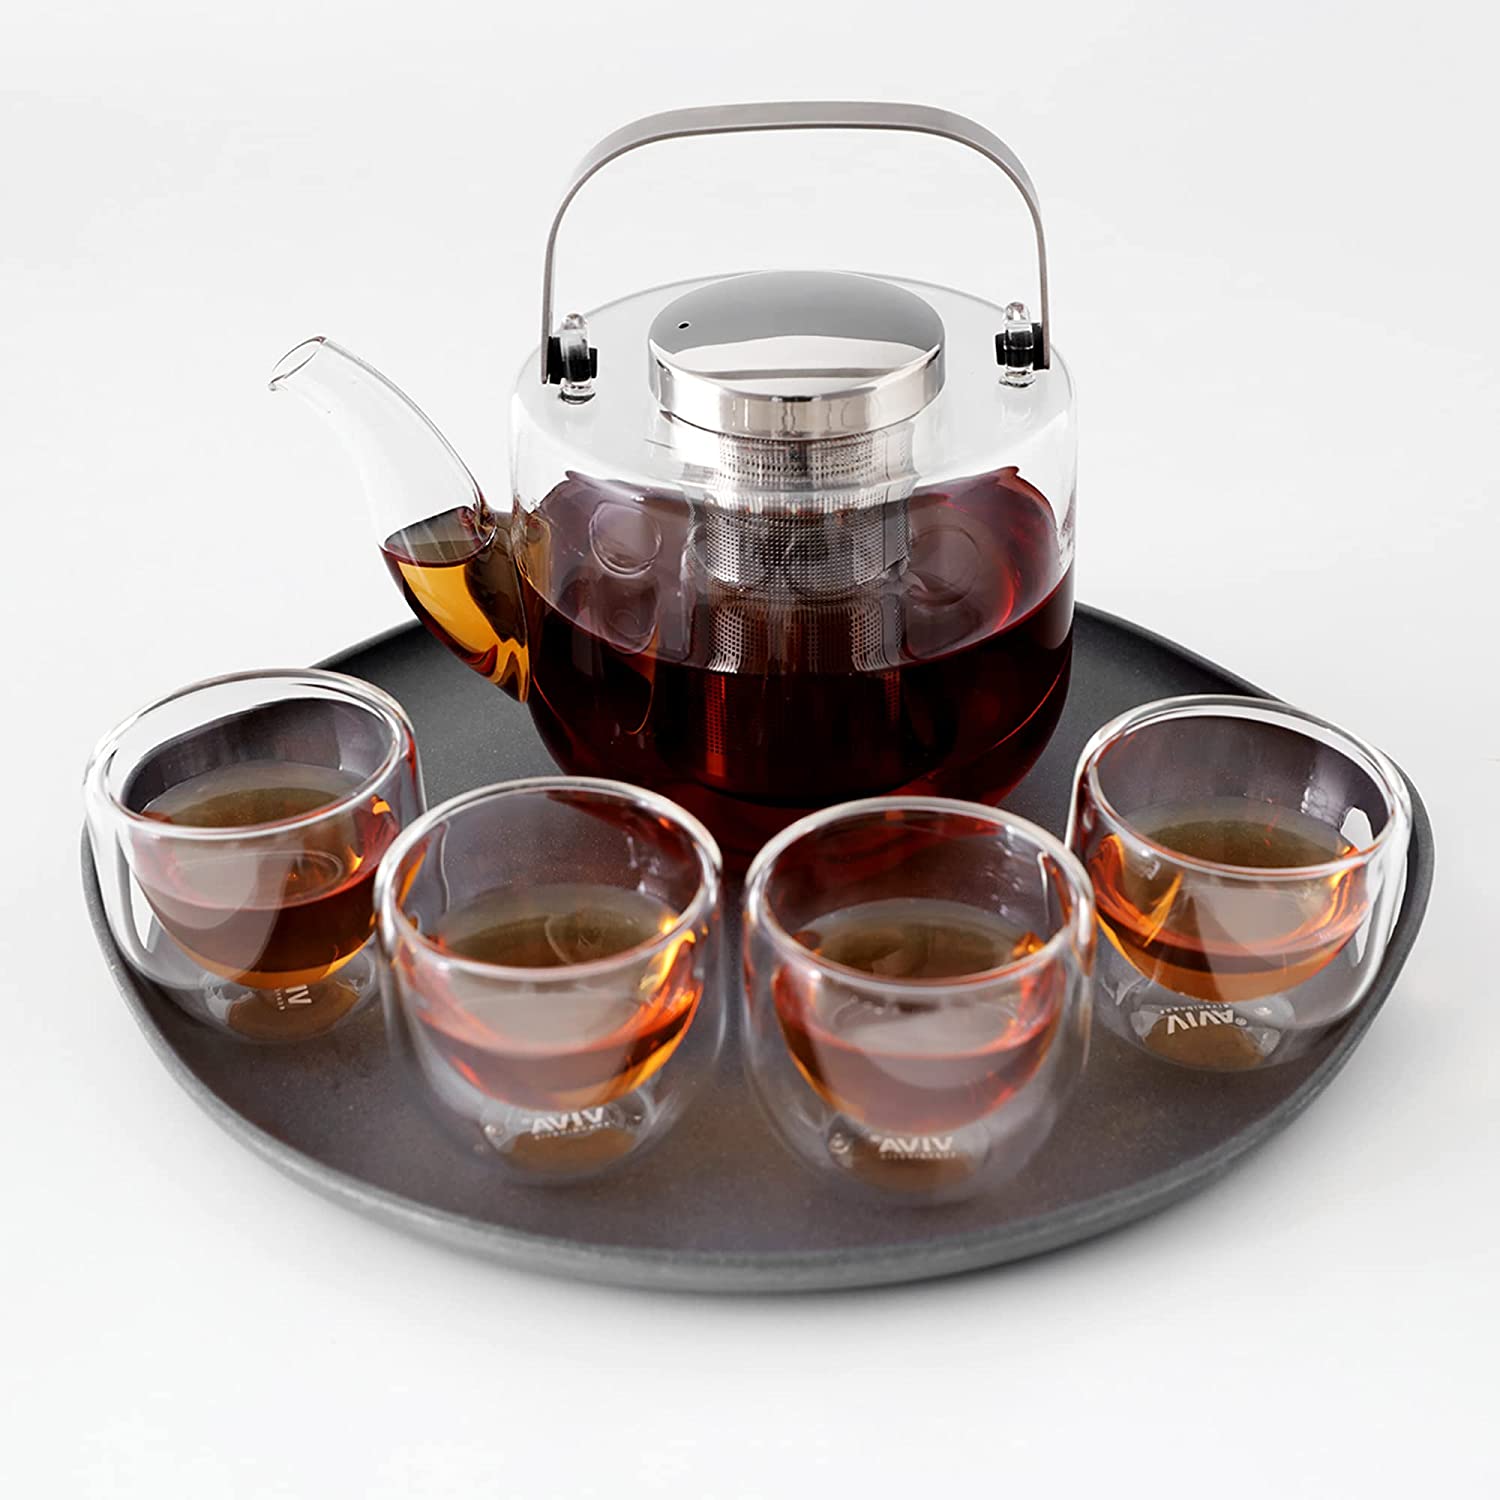 VIVA Scandinavia Teapot with strainer insert, glass tea maker in set with 4 small tea cups made of borosilicate glass and serving tray grey, dishwasher-safe, drip-free, 0.75 litres